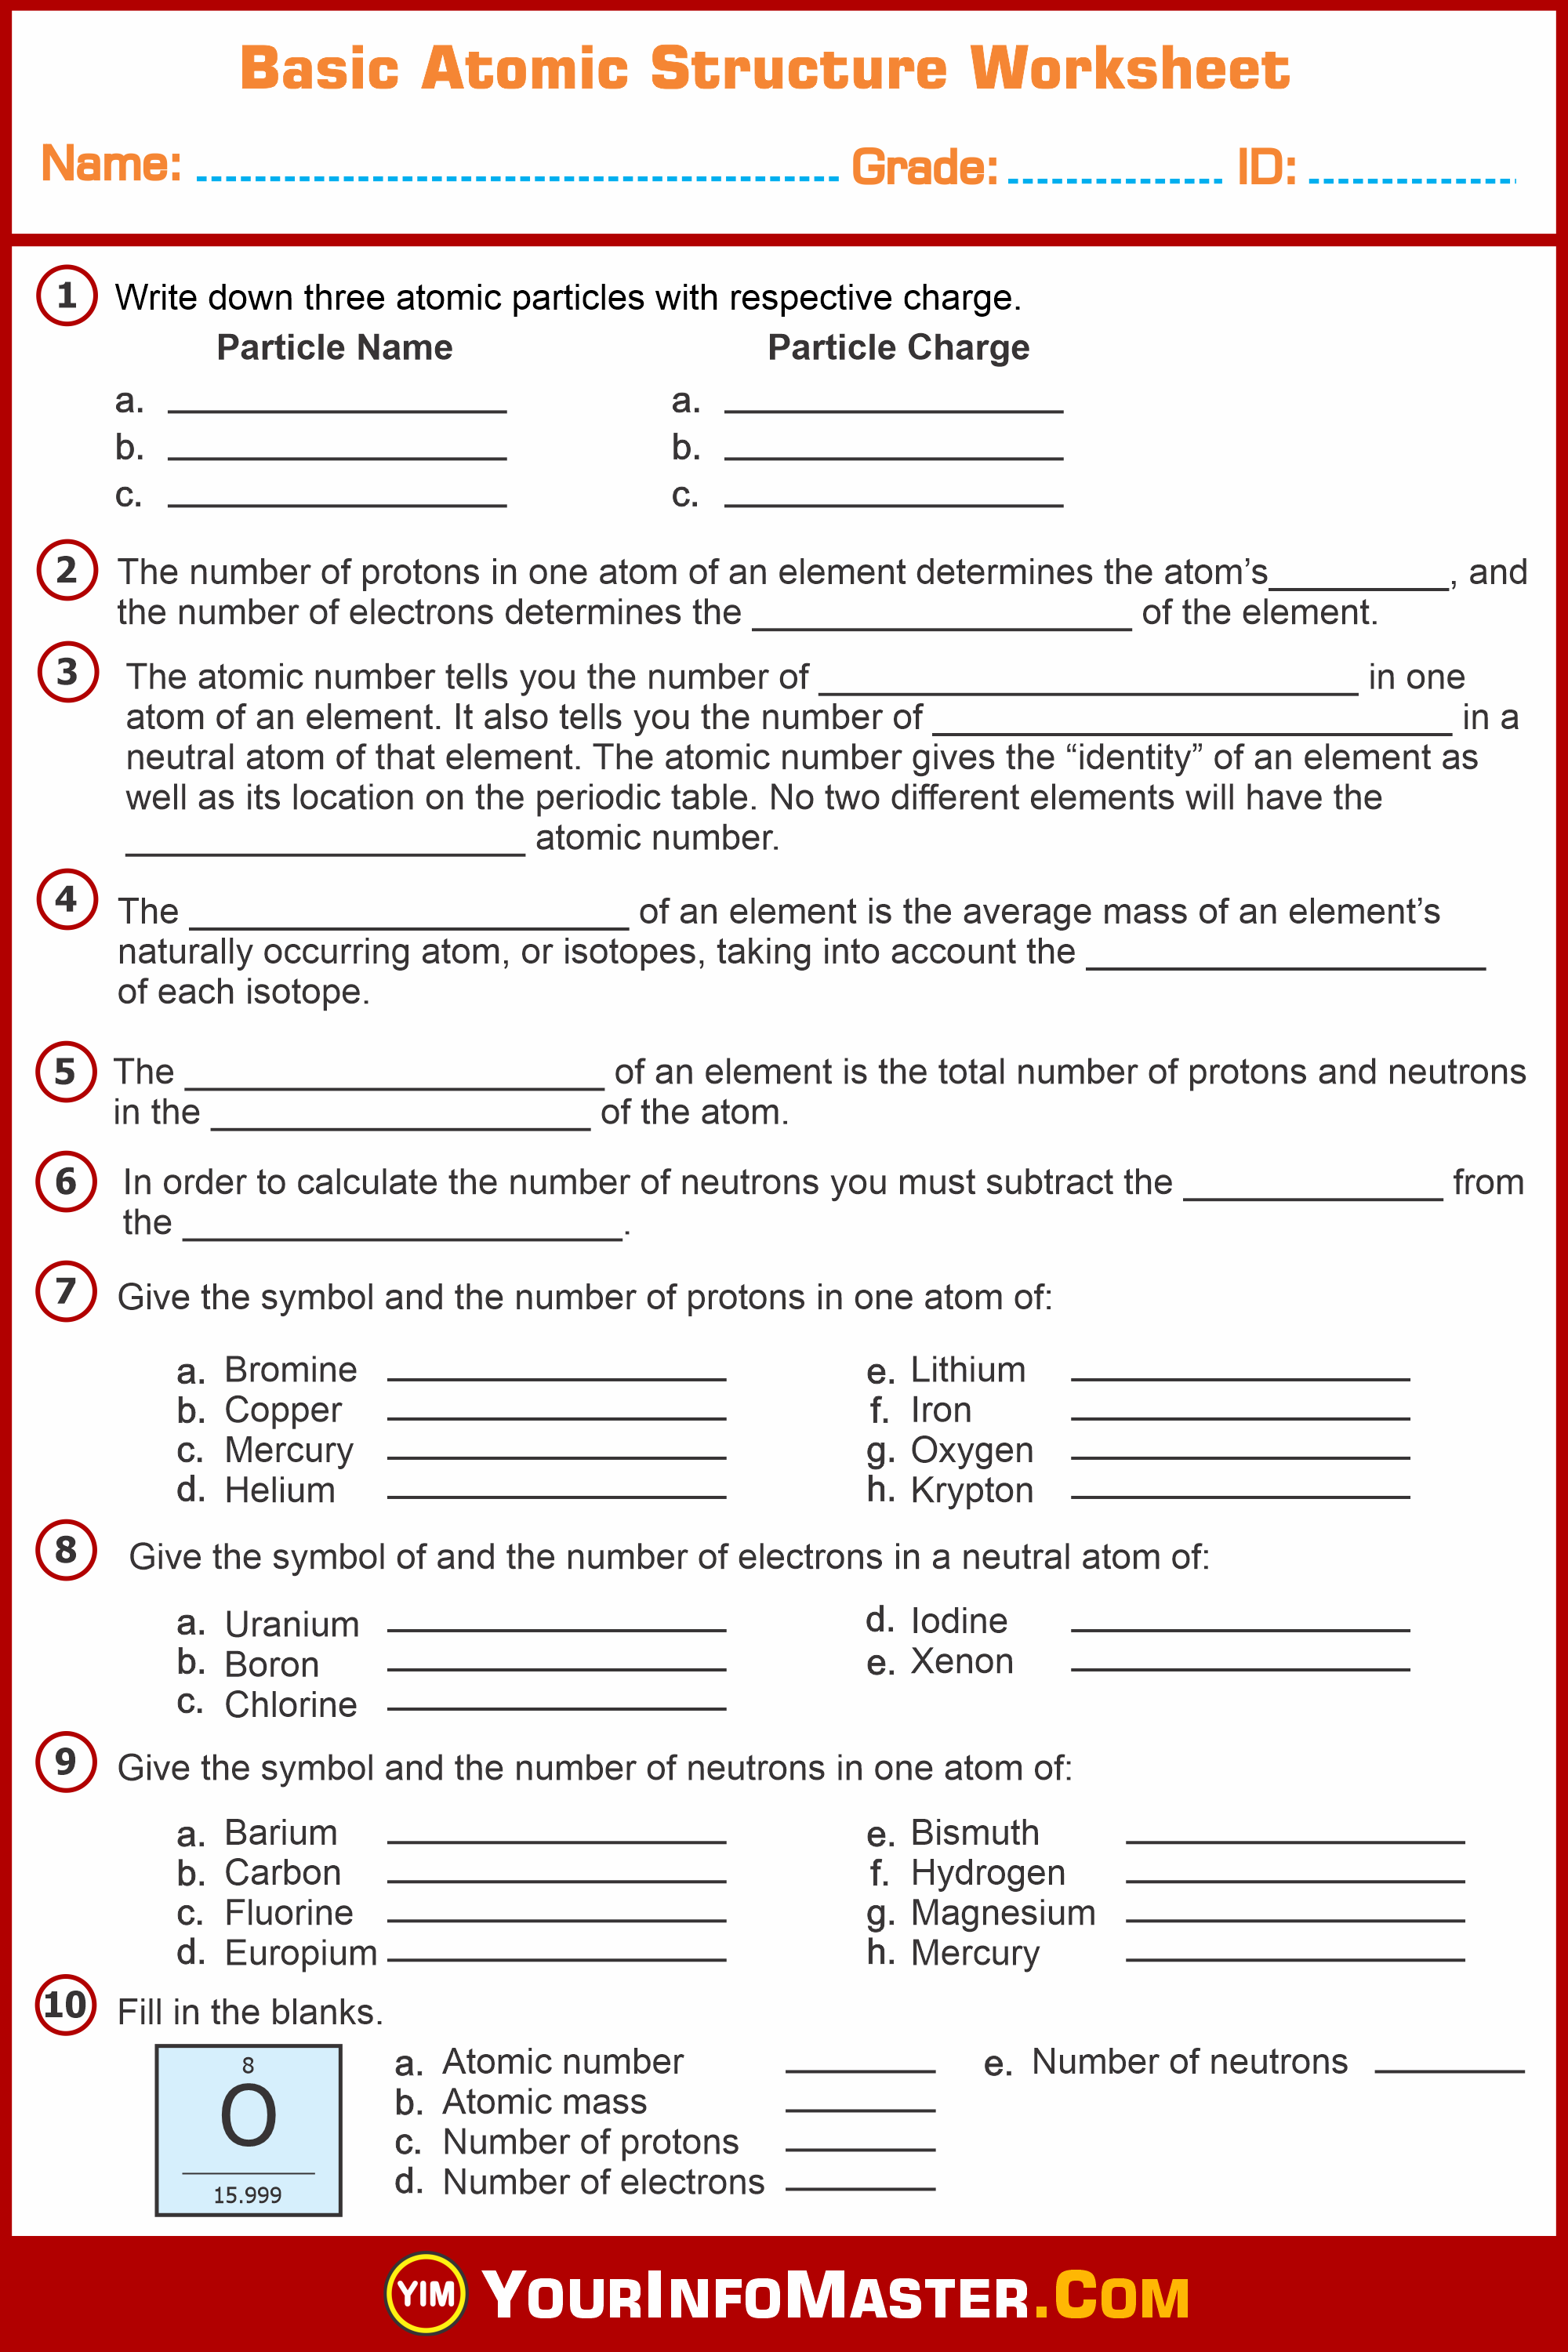 Basic Atomic Structure Worksheet - Your Info Master Intended For Worksheet Atomic Structure Answers